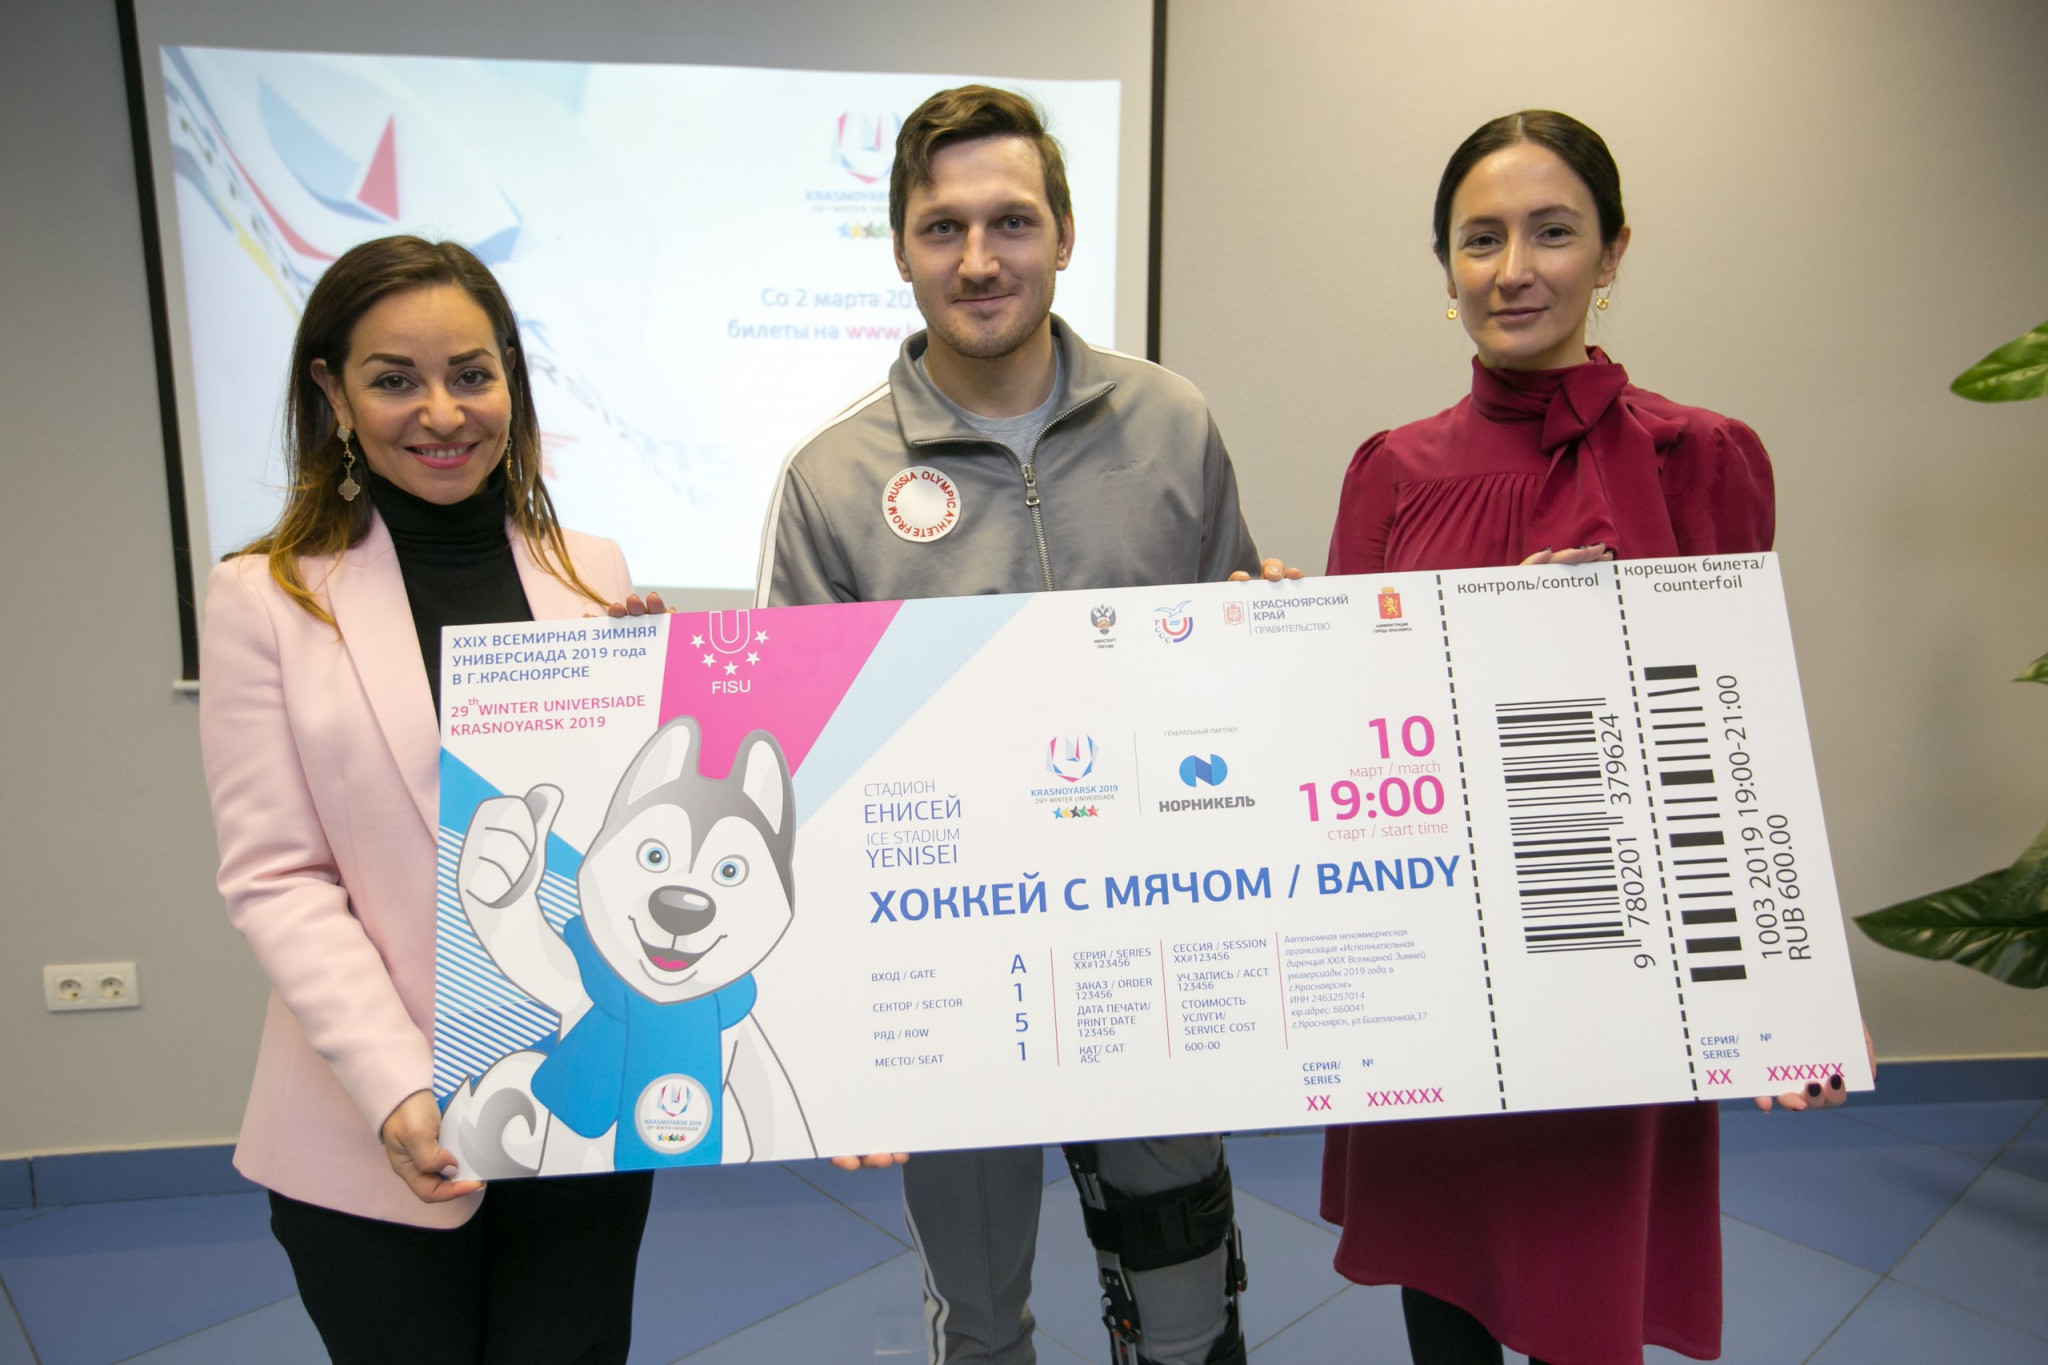 Organisers are implementing a number of measures to combat counterfeit tickets ©Krasnoyarsk 2019